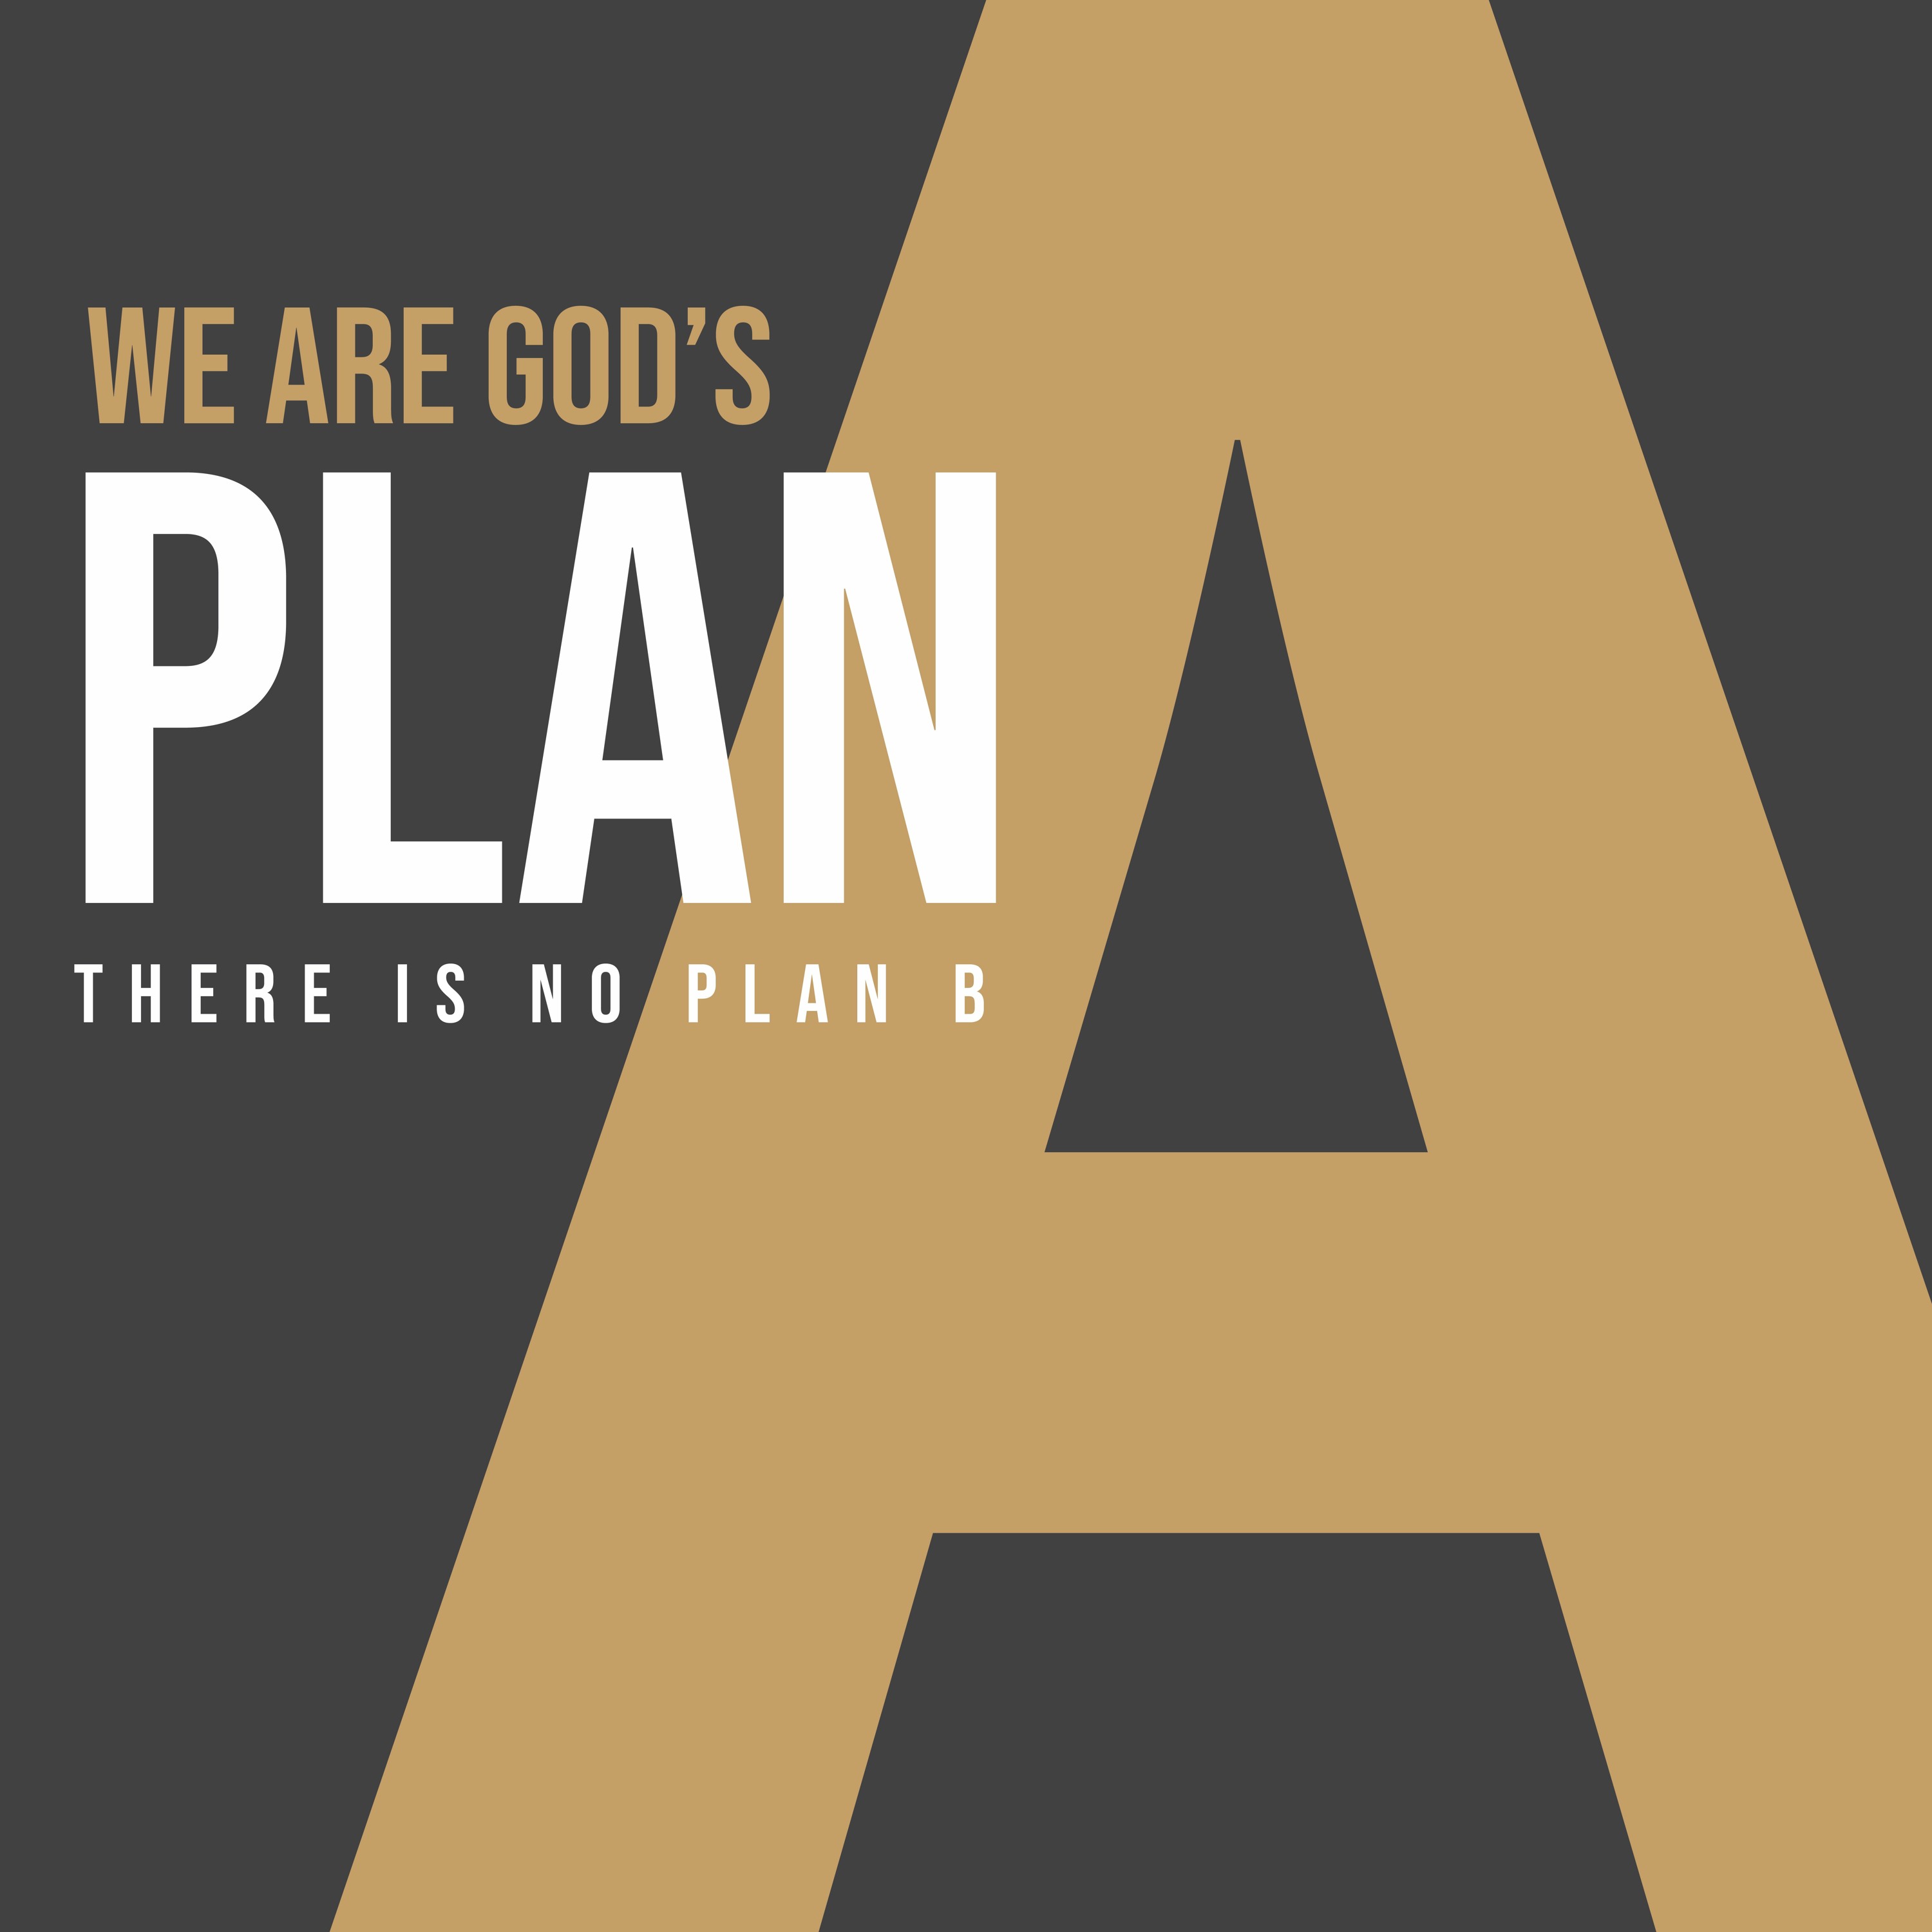 God's Plan A For Evangelism | We Are God's Plan A | Ethan Magness